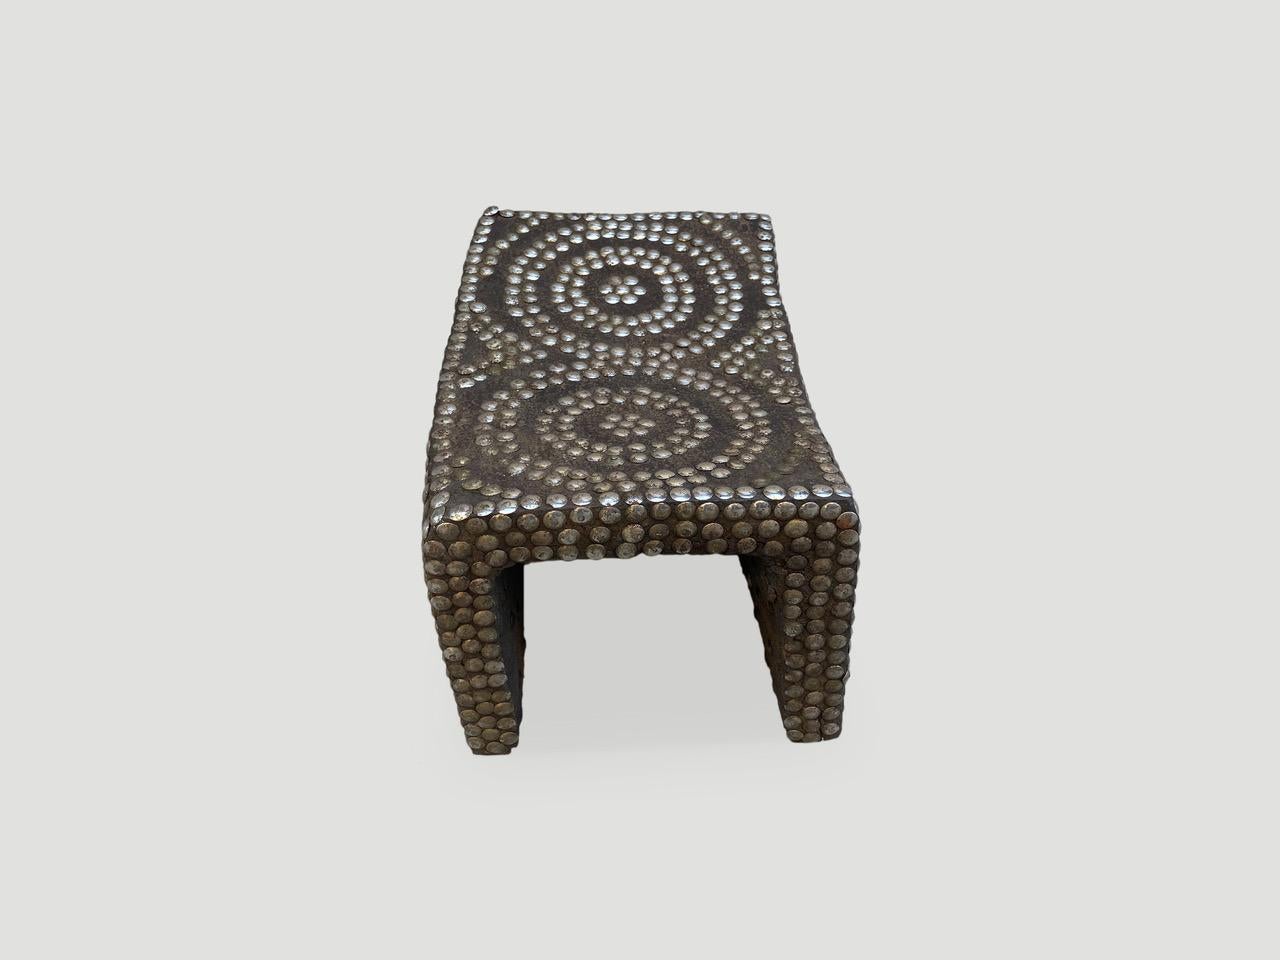 Ngombe Congo royal throne, said to be a queens stool or tabouret denoting prestige and high status. From the general area along the Congo river, West Africa. Hand carved from a formidable, heavy wood with brass and iron nail studs.

This stool was